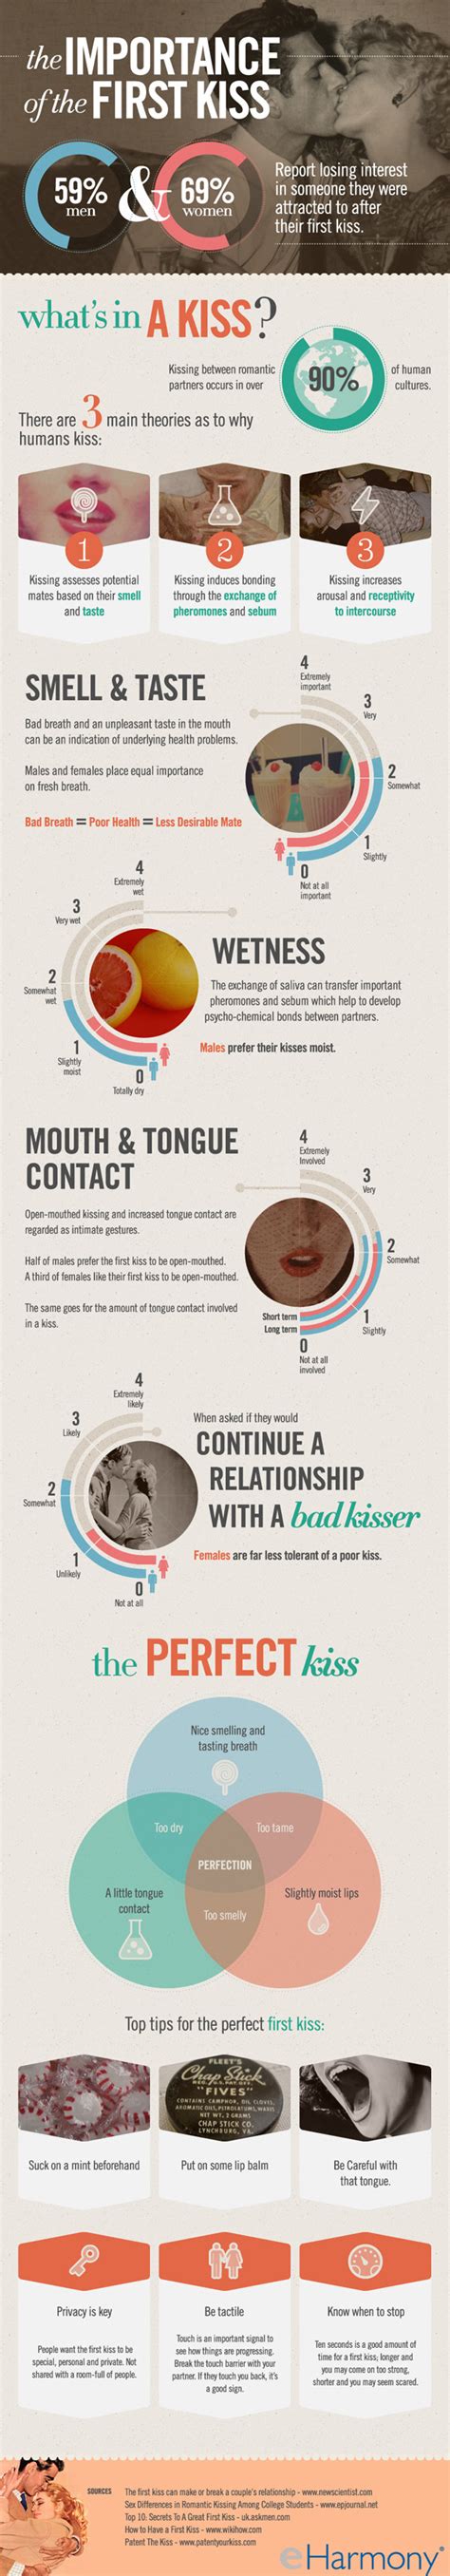 the importance of the first kiss infographic visualistan